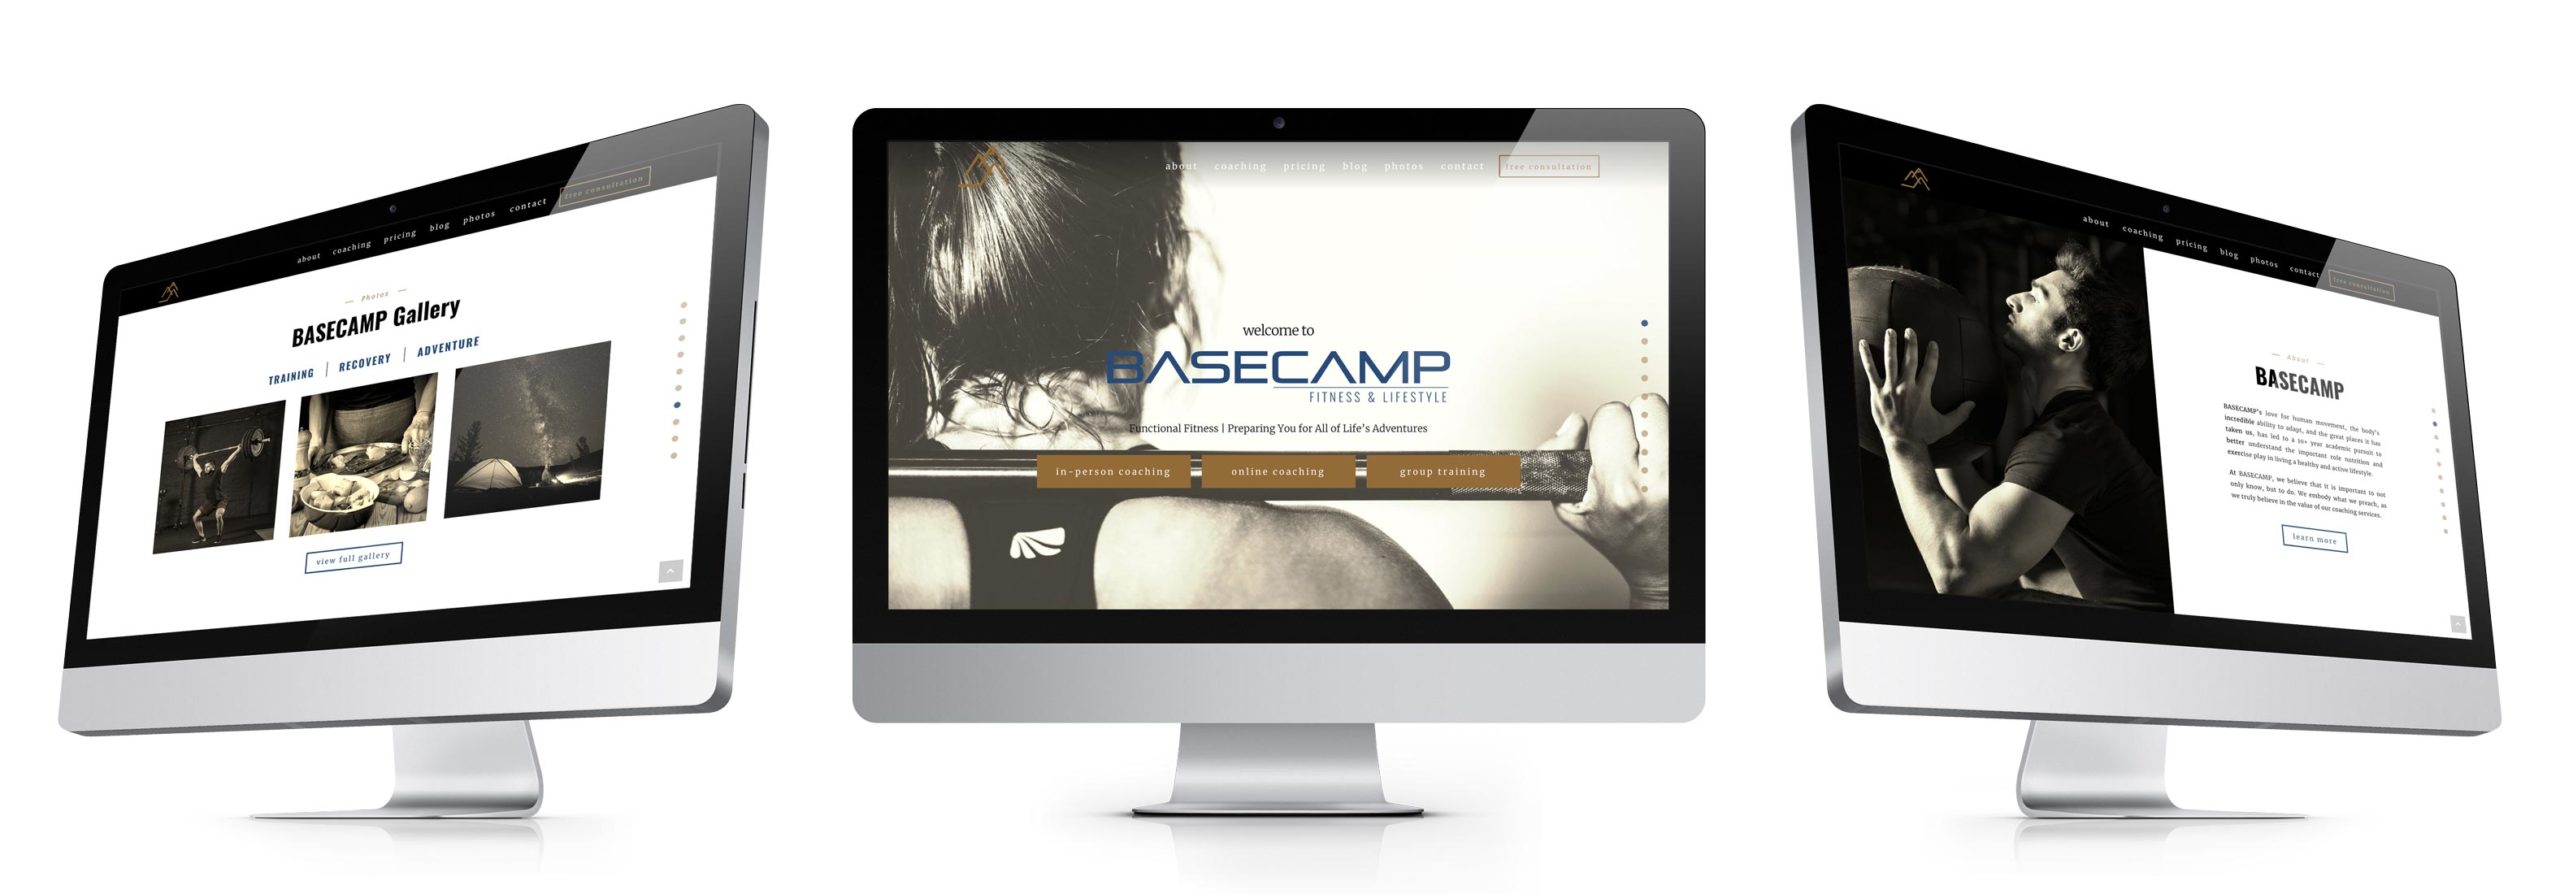 BASECAMP Fitness & Lifestyle